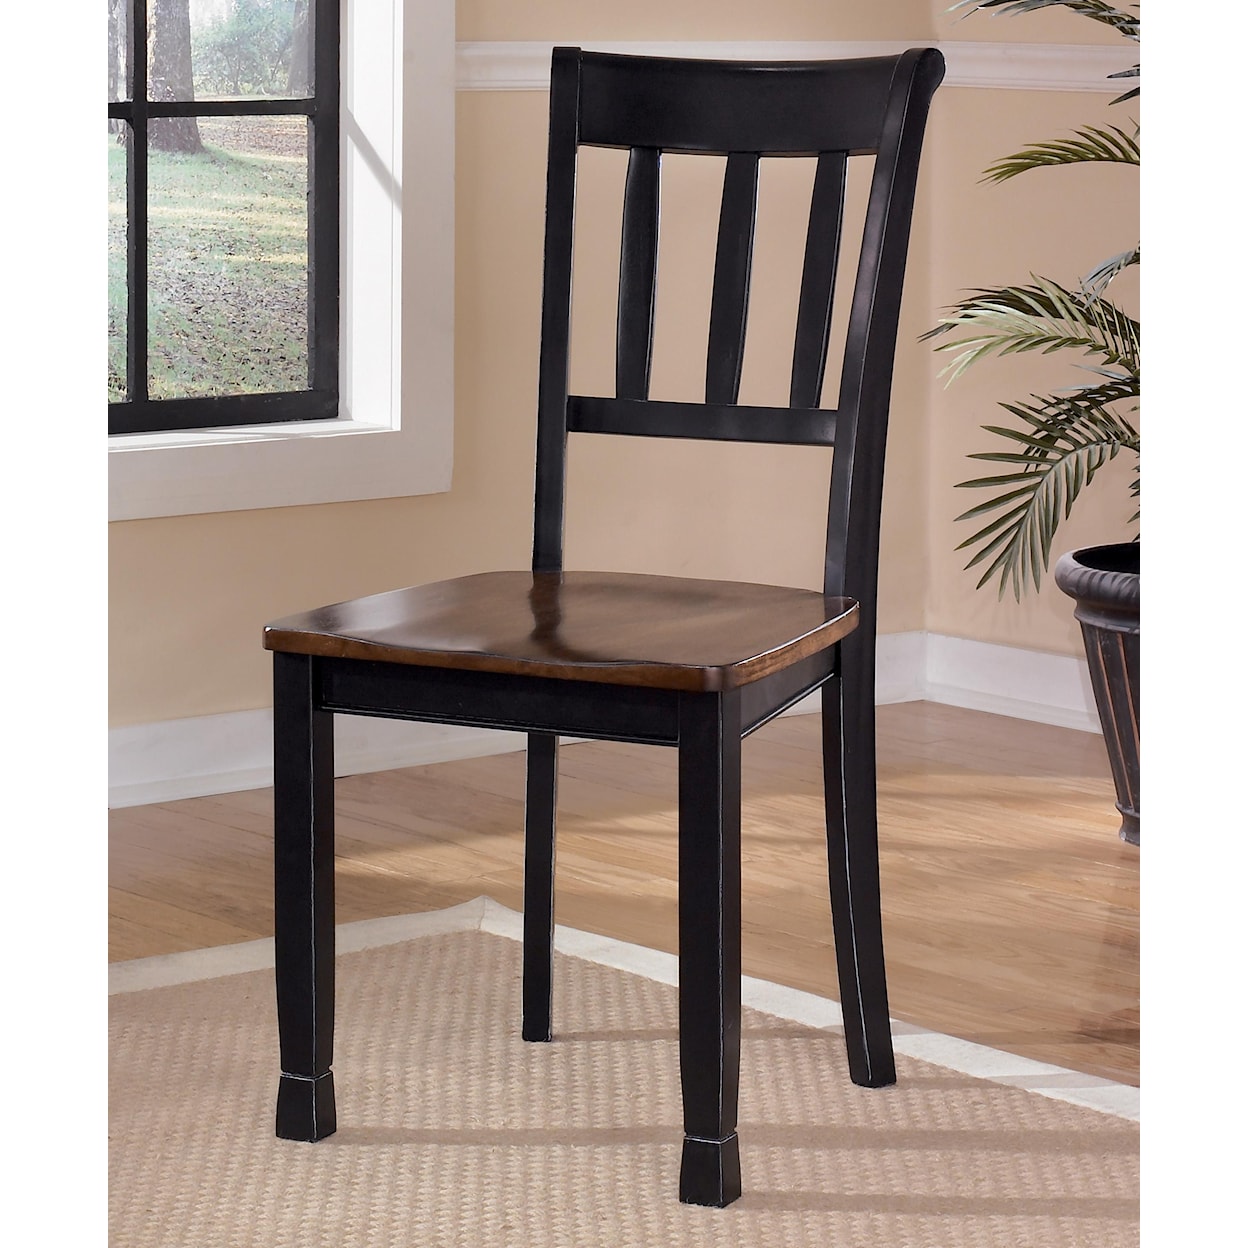 Ashley Furniture Signature Design Owingsville Dining Room Side Chair